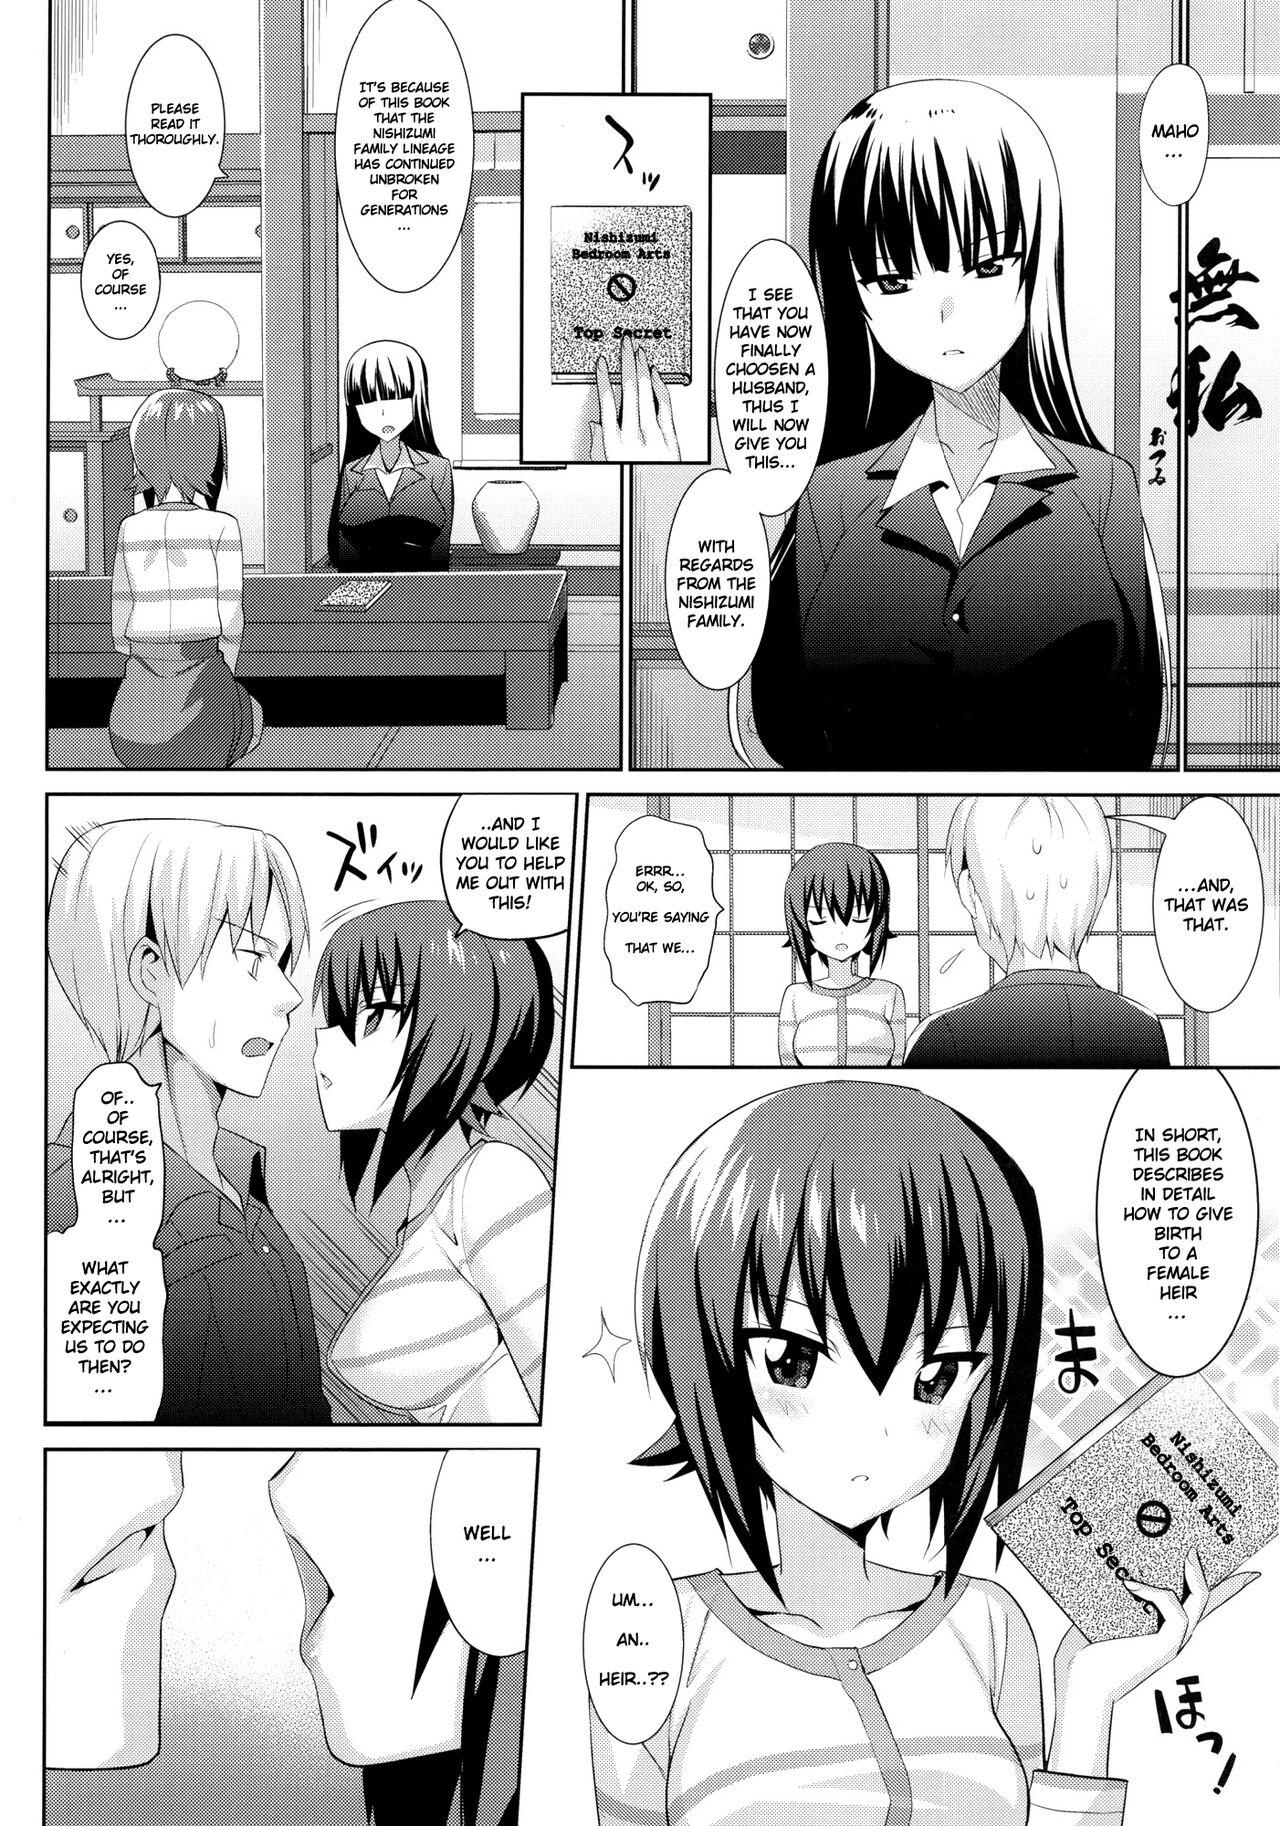 Flagra LET ME LOVE YOU TOO - Girls und panzer Free - Page 5